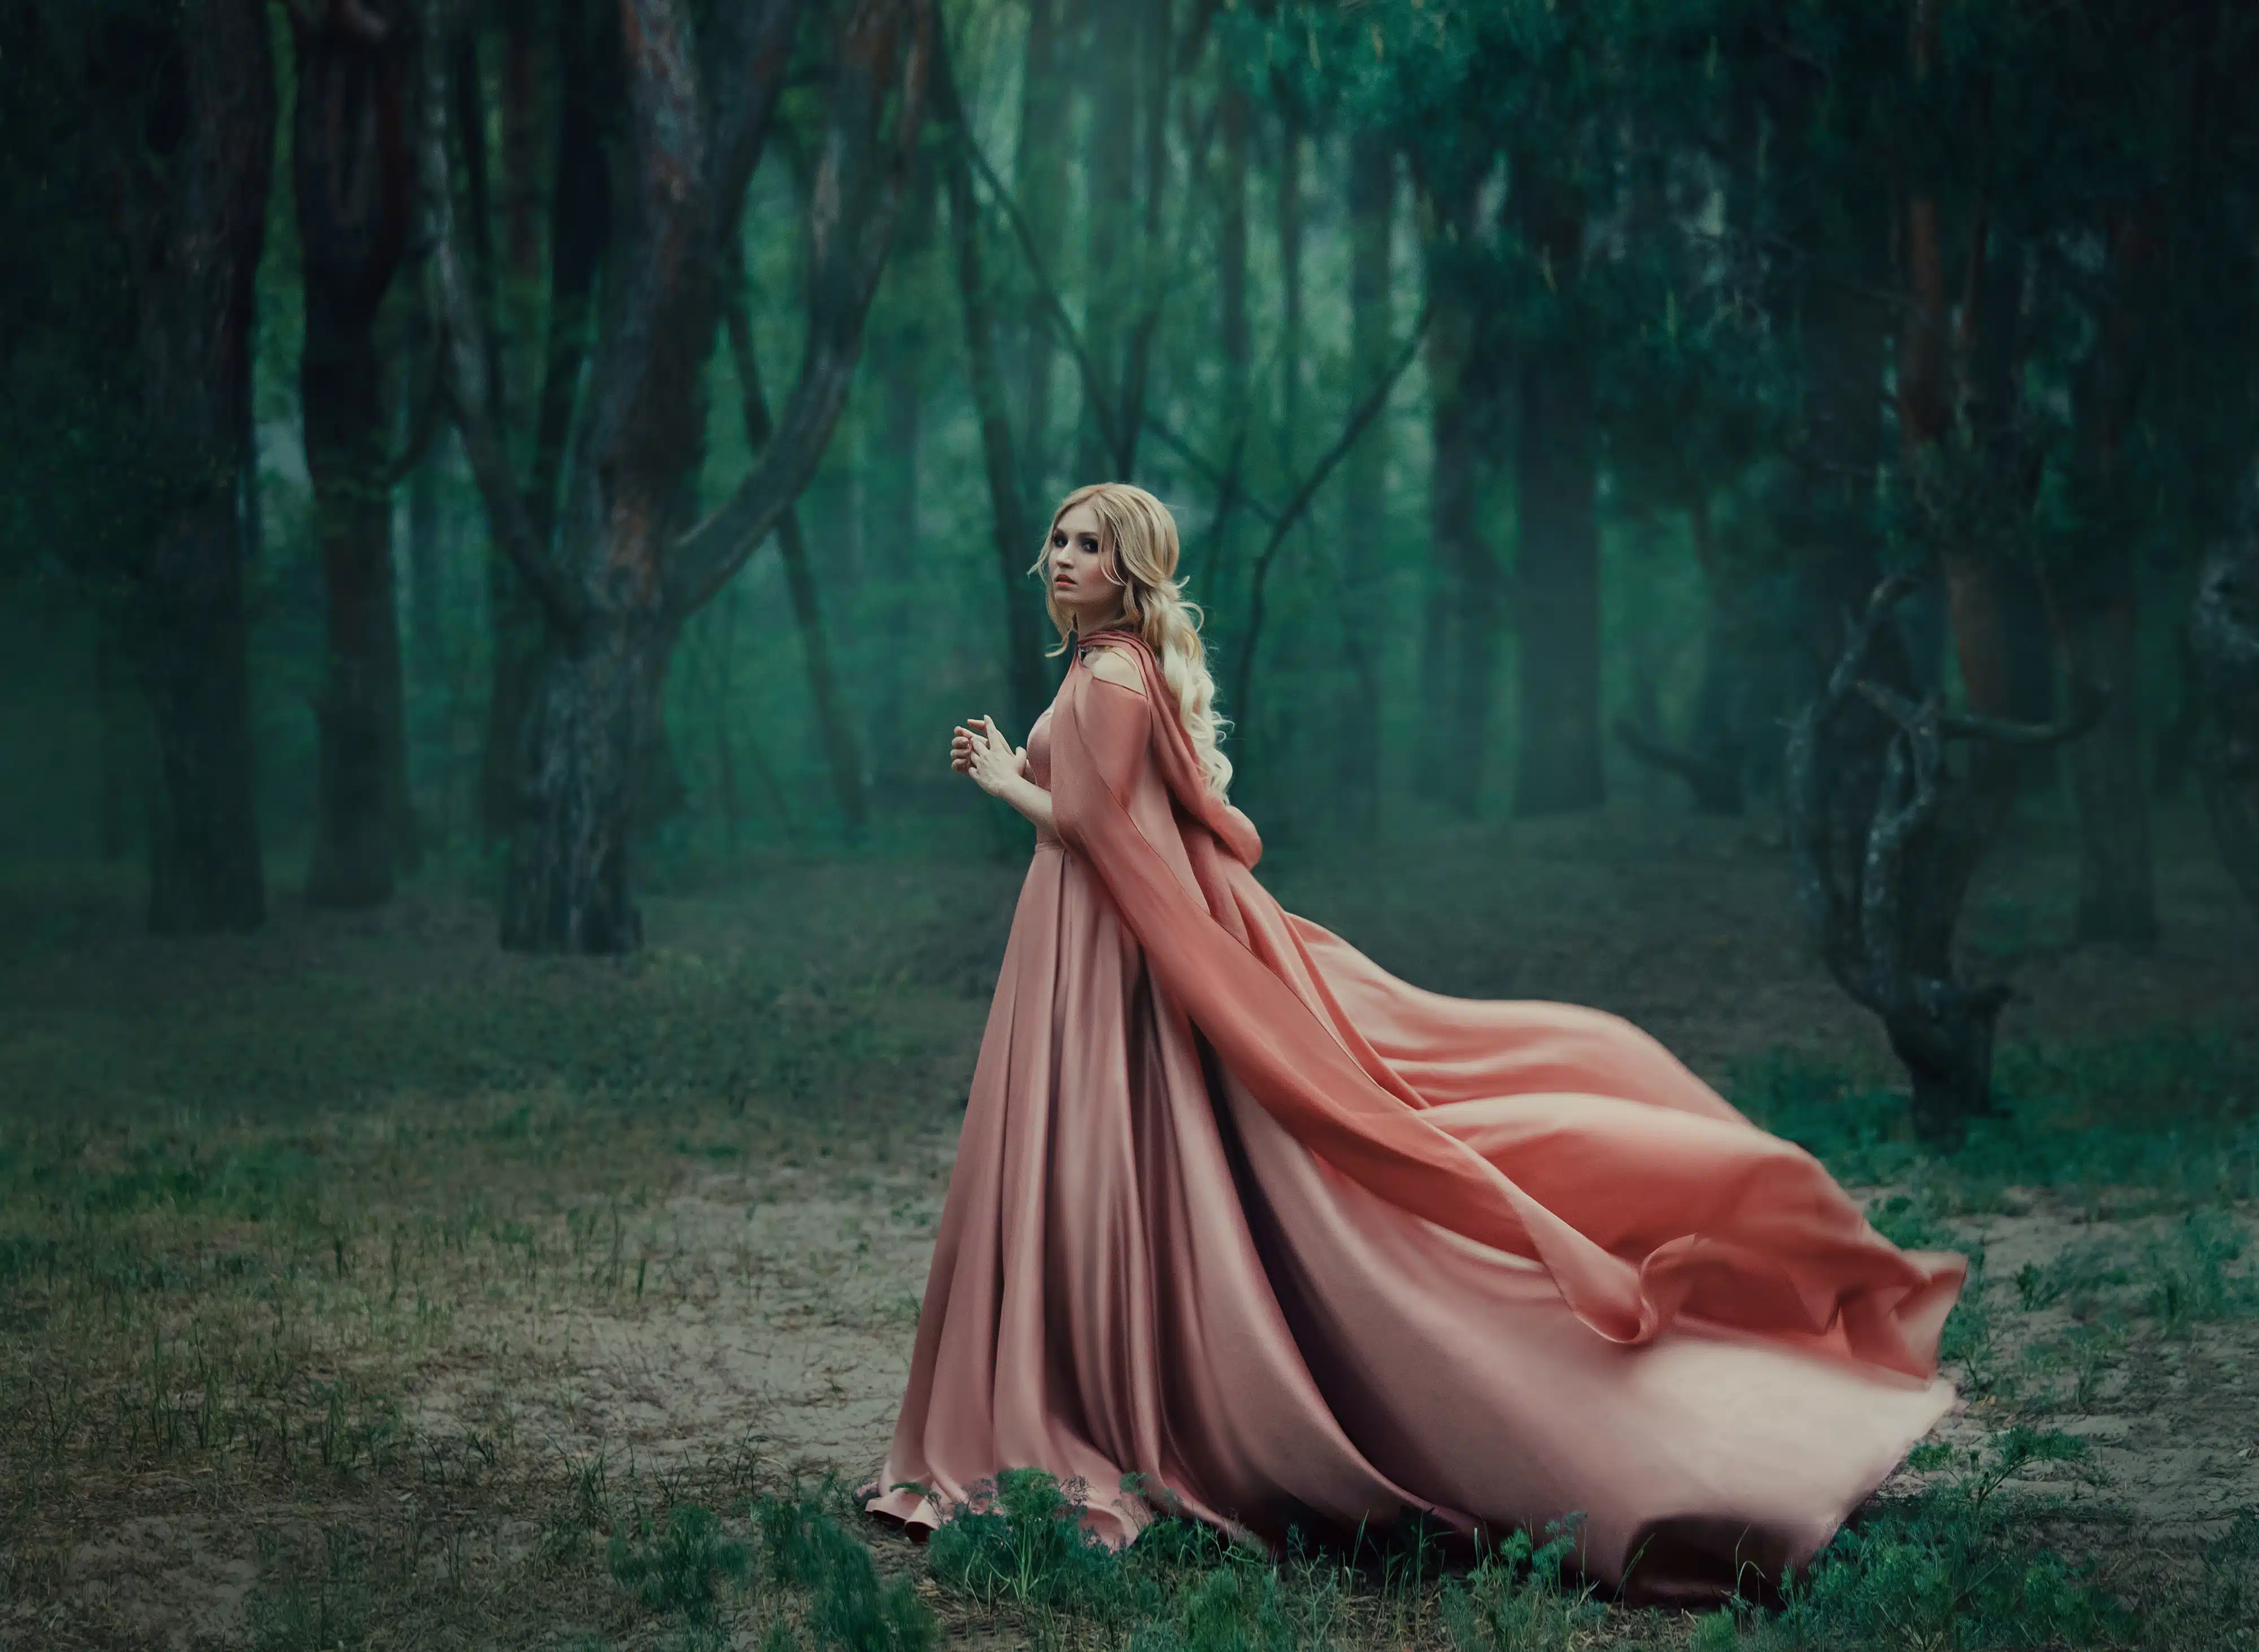 A mysterious blonde girl in a long pink dress with a train and a raincoat that flutters in the wind.